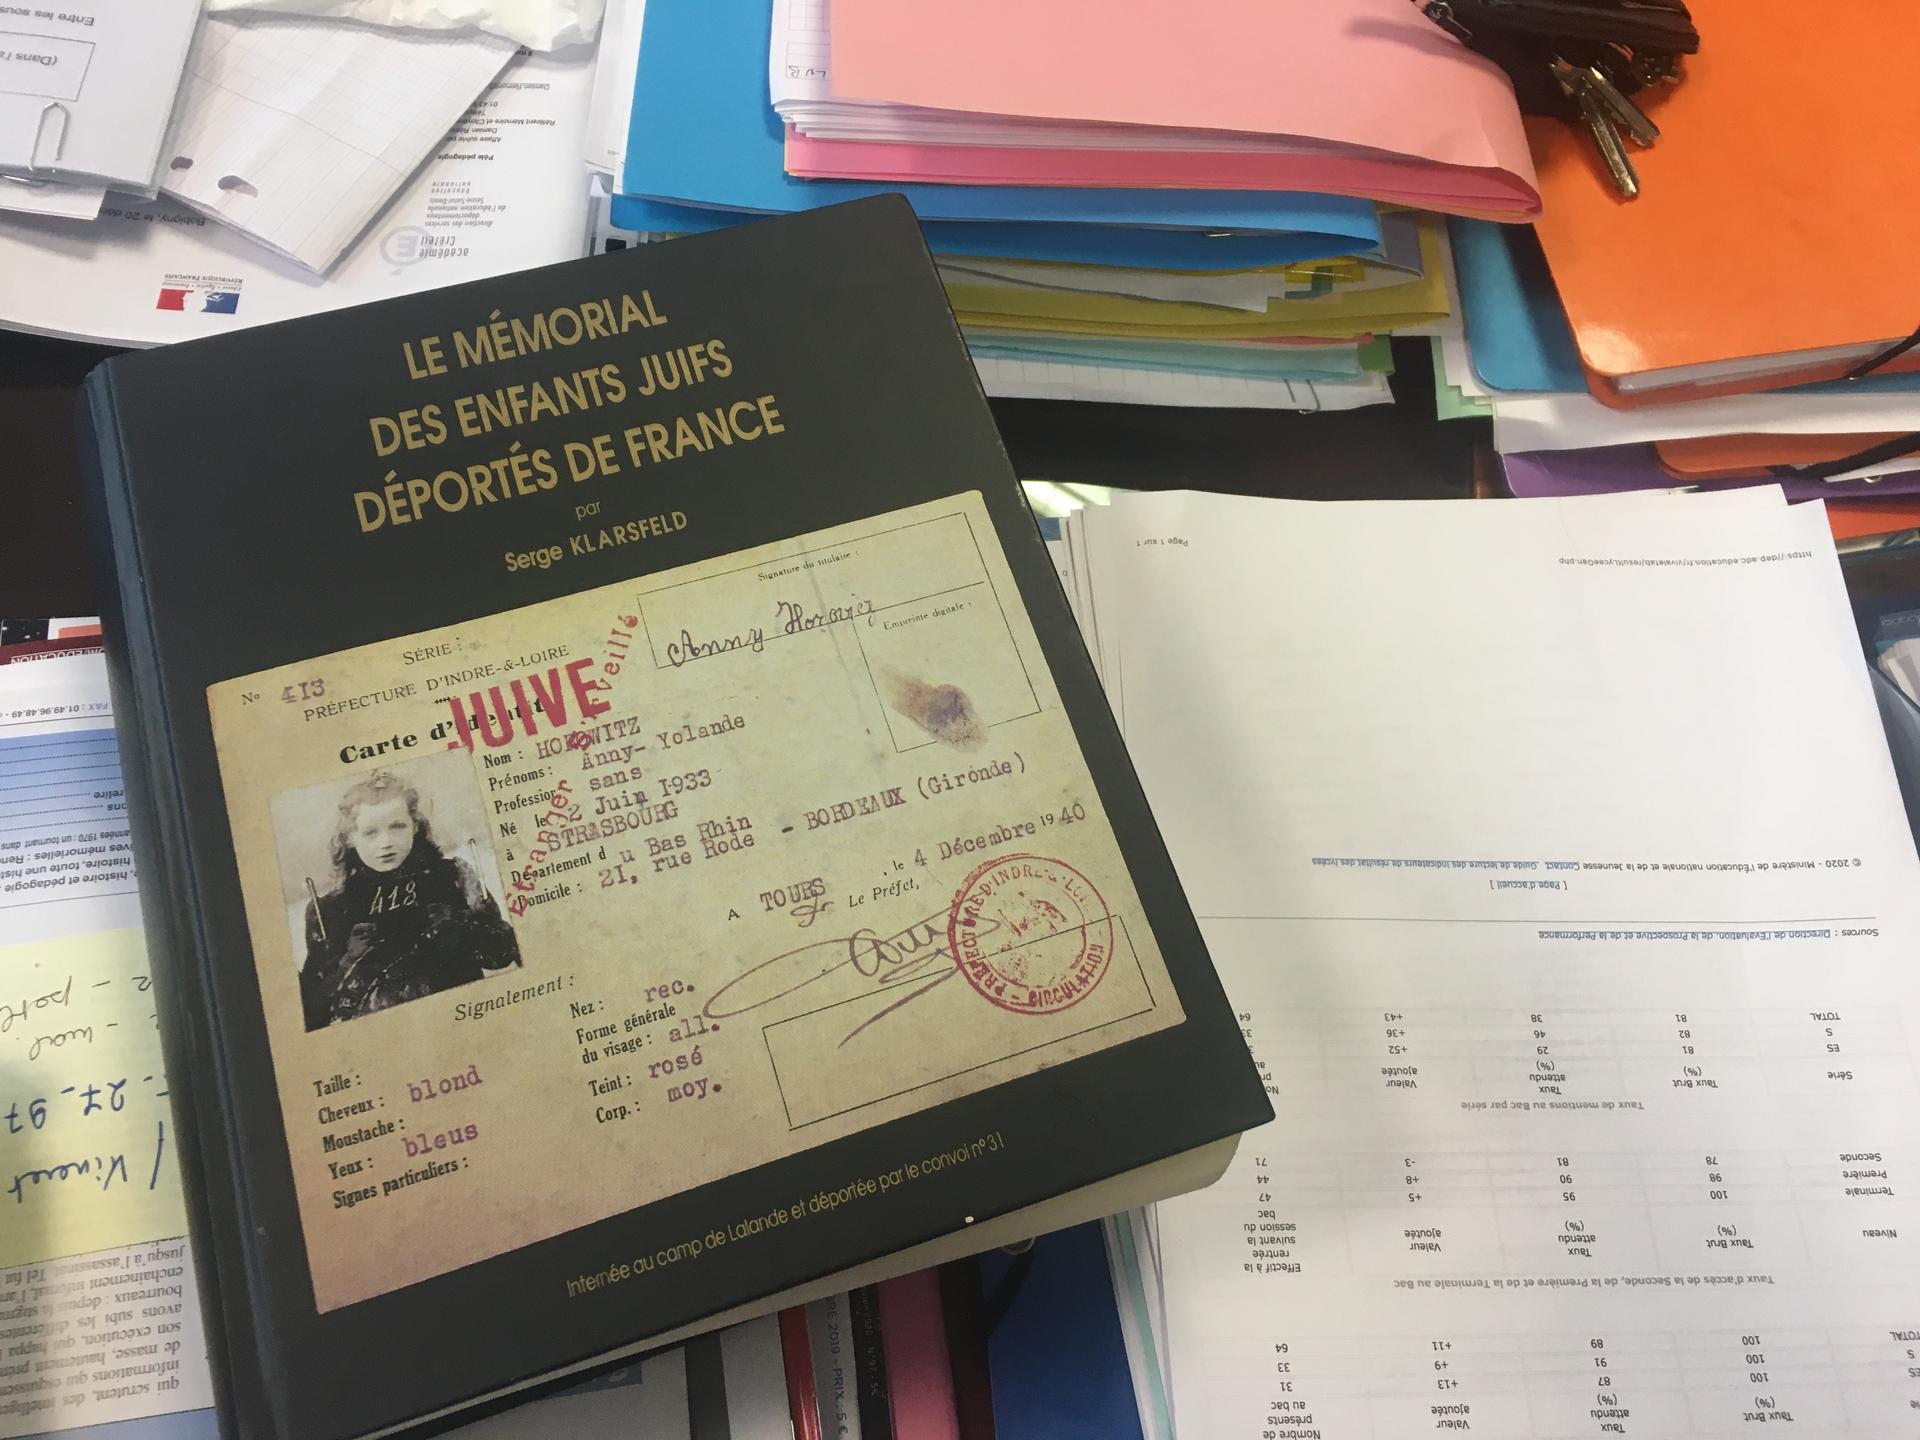 Around 11,400 children were deported from France during the Holocaust. Students at Alliance Pavillons Sous Bois will spend time tracing the history of individual child deportees as part of the school's Holocaust curriculum.